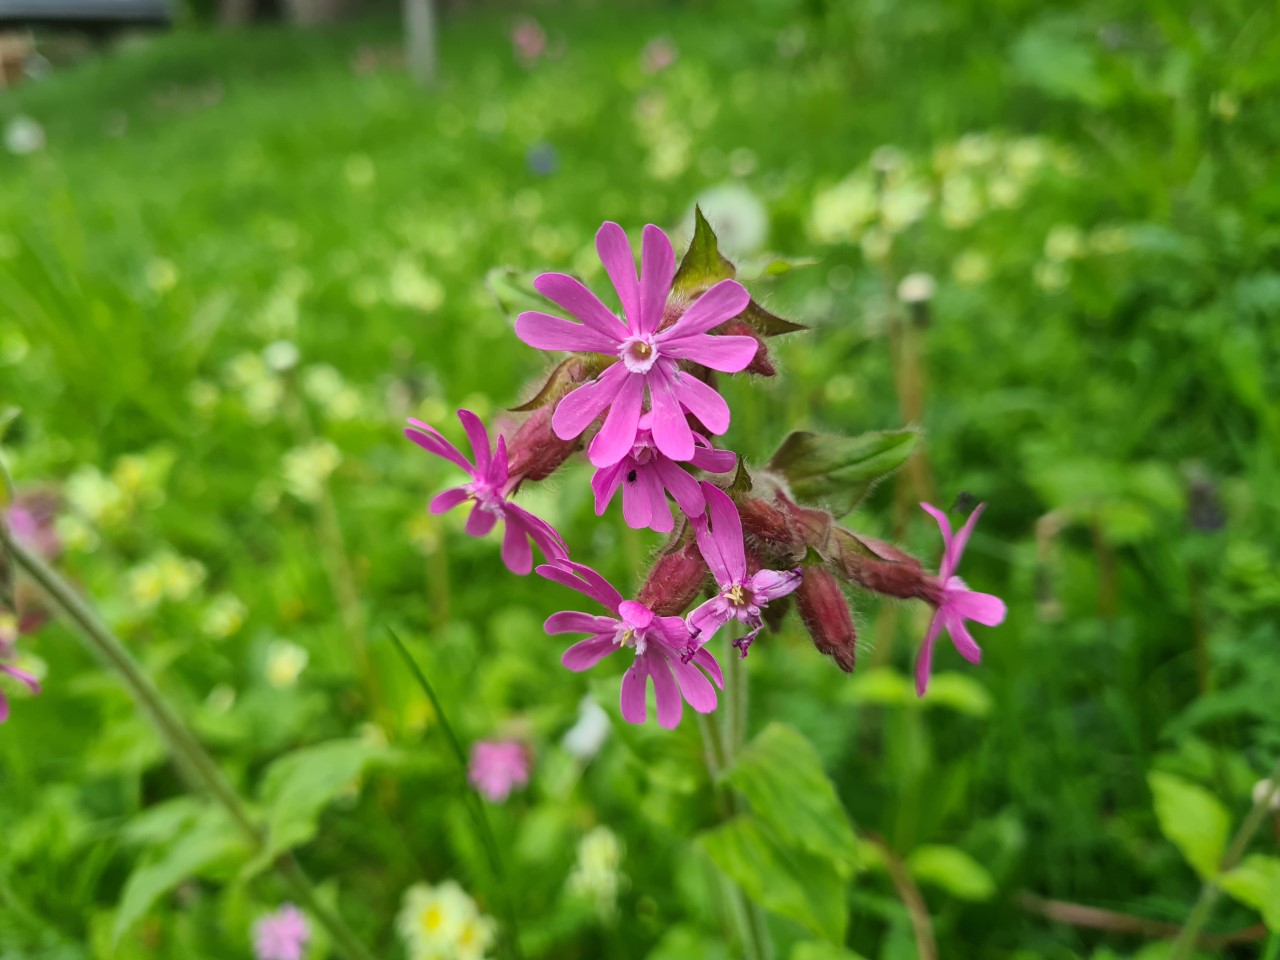 Wildlife at the Western - Silene Dioica red Campion - - image thanks to Jim Scott